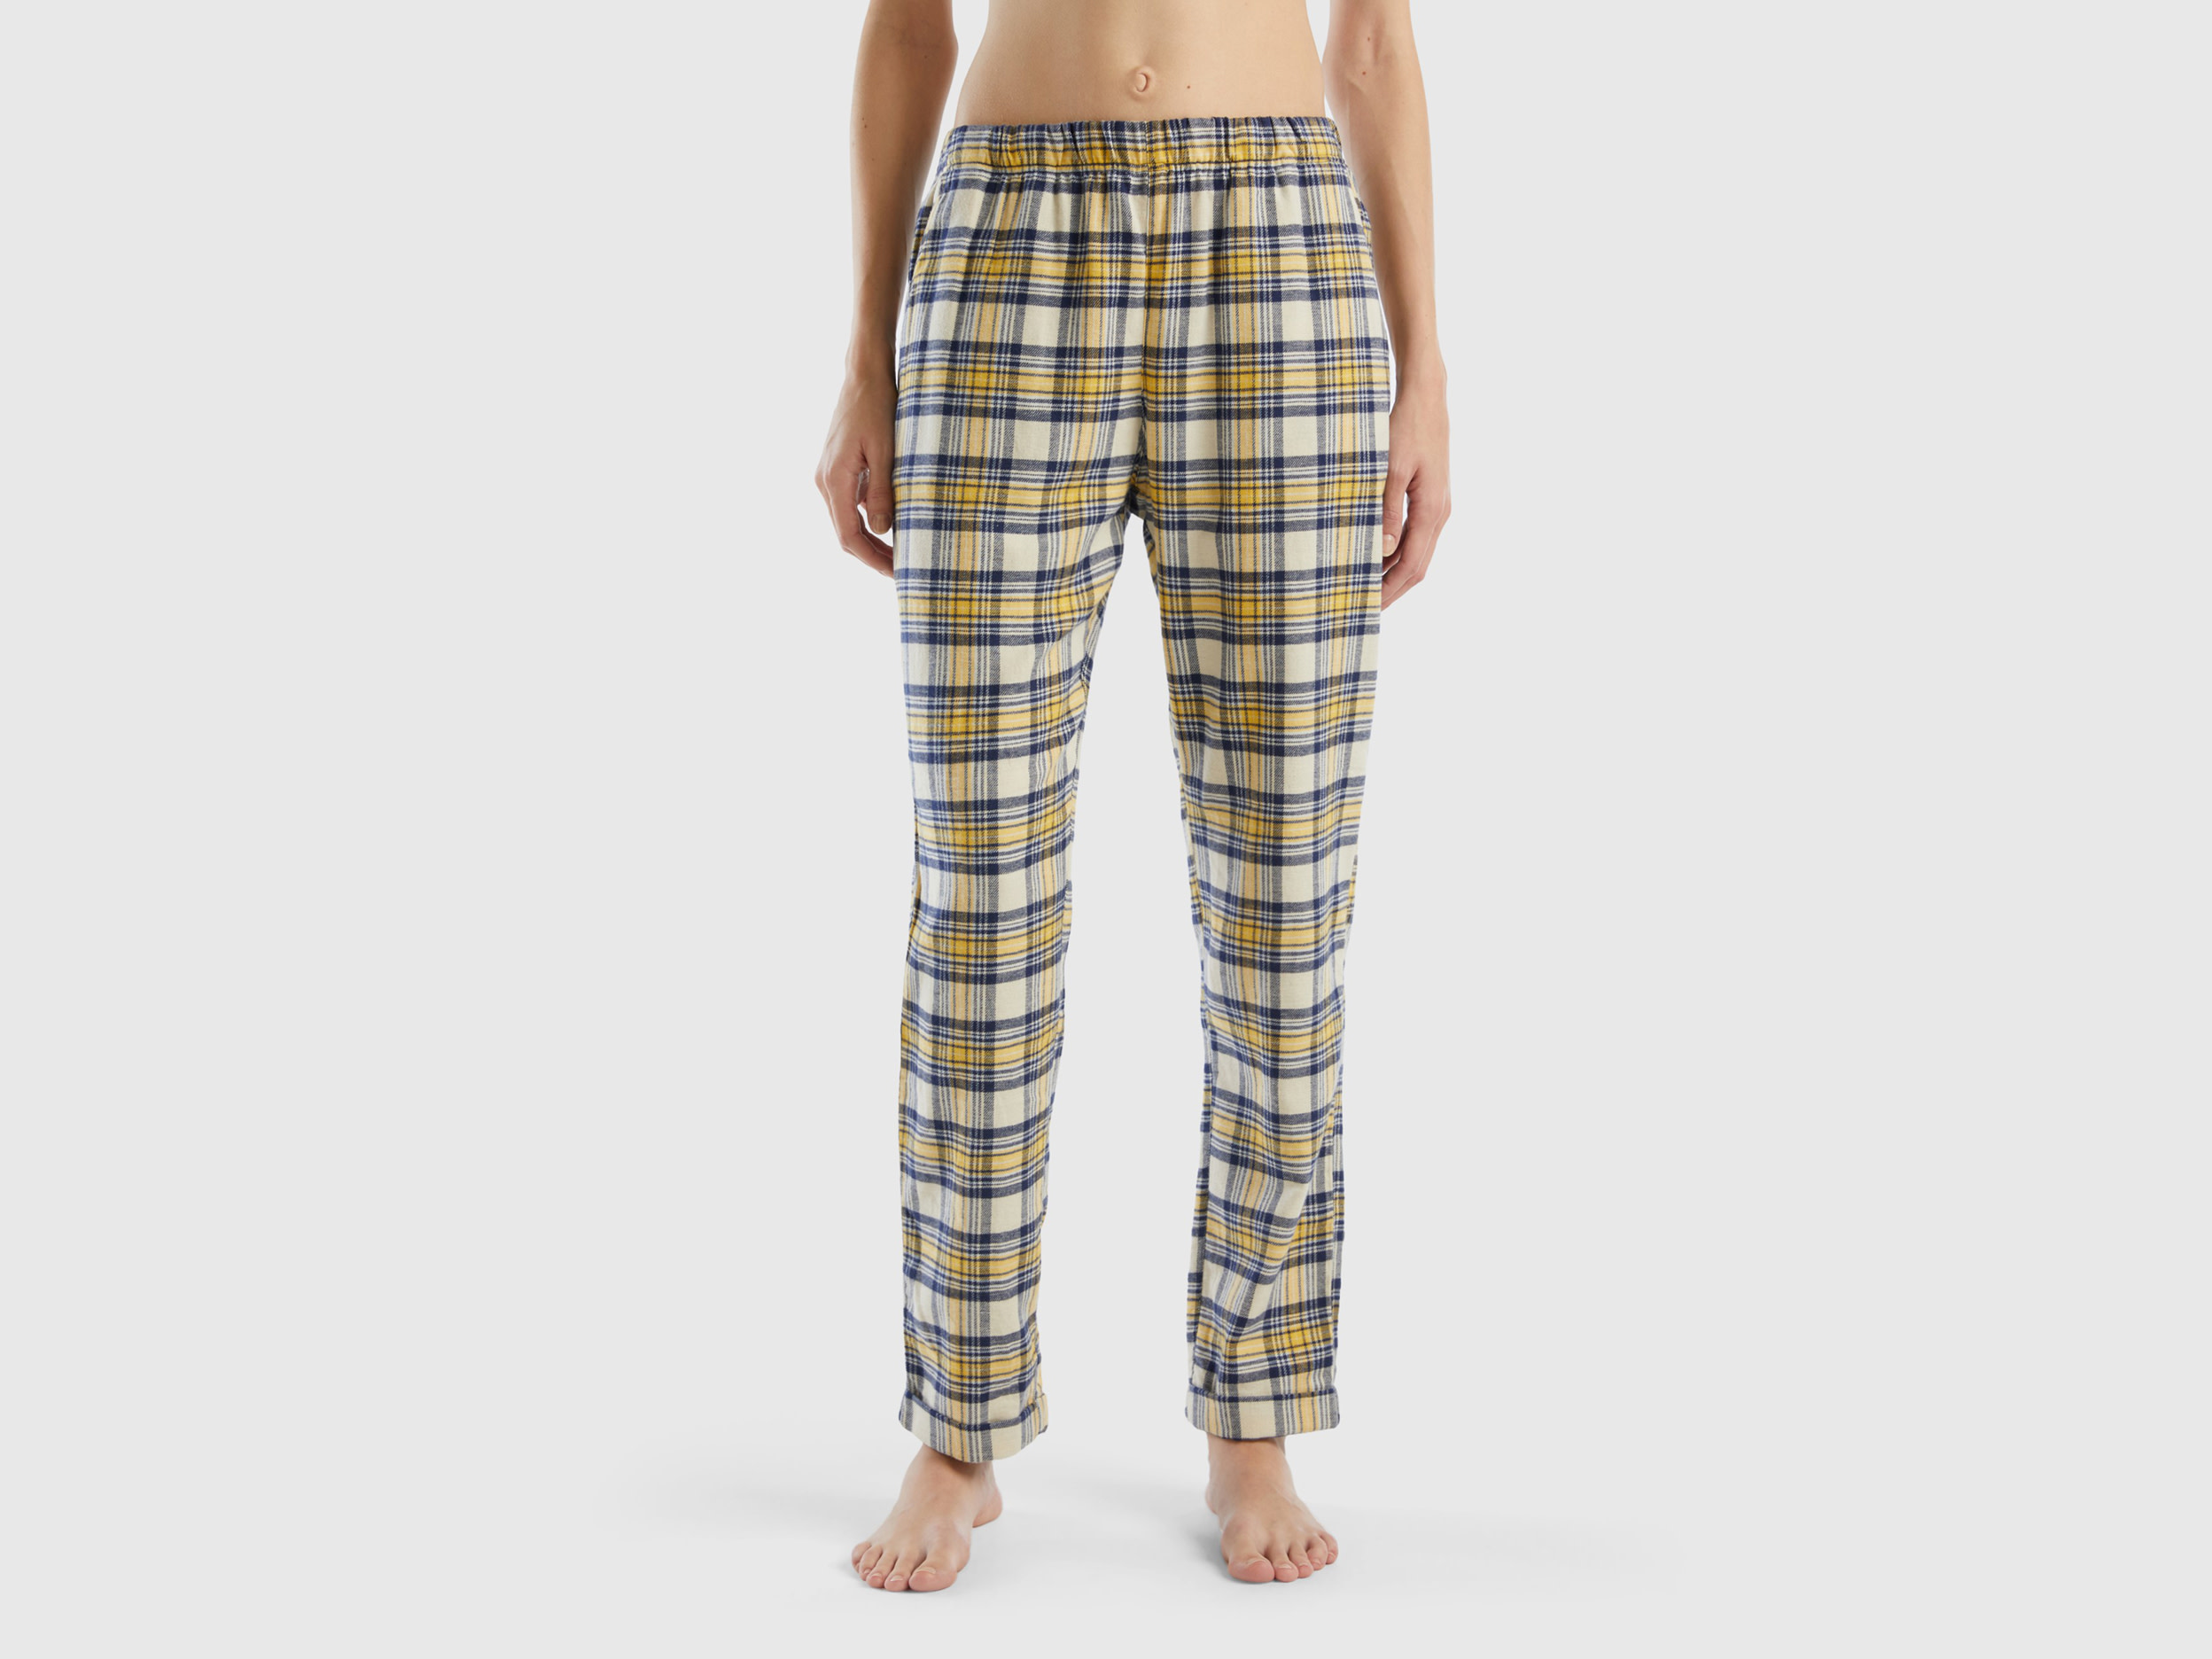 Benetton, Yellow And Blue Tartan Trousers, size L, Multi-color, Women